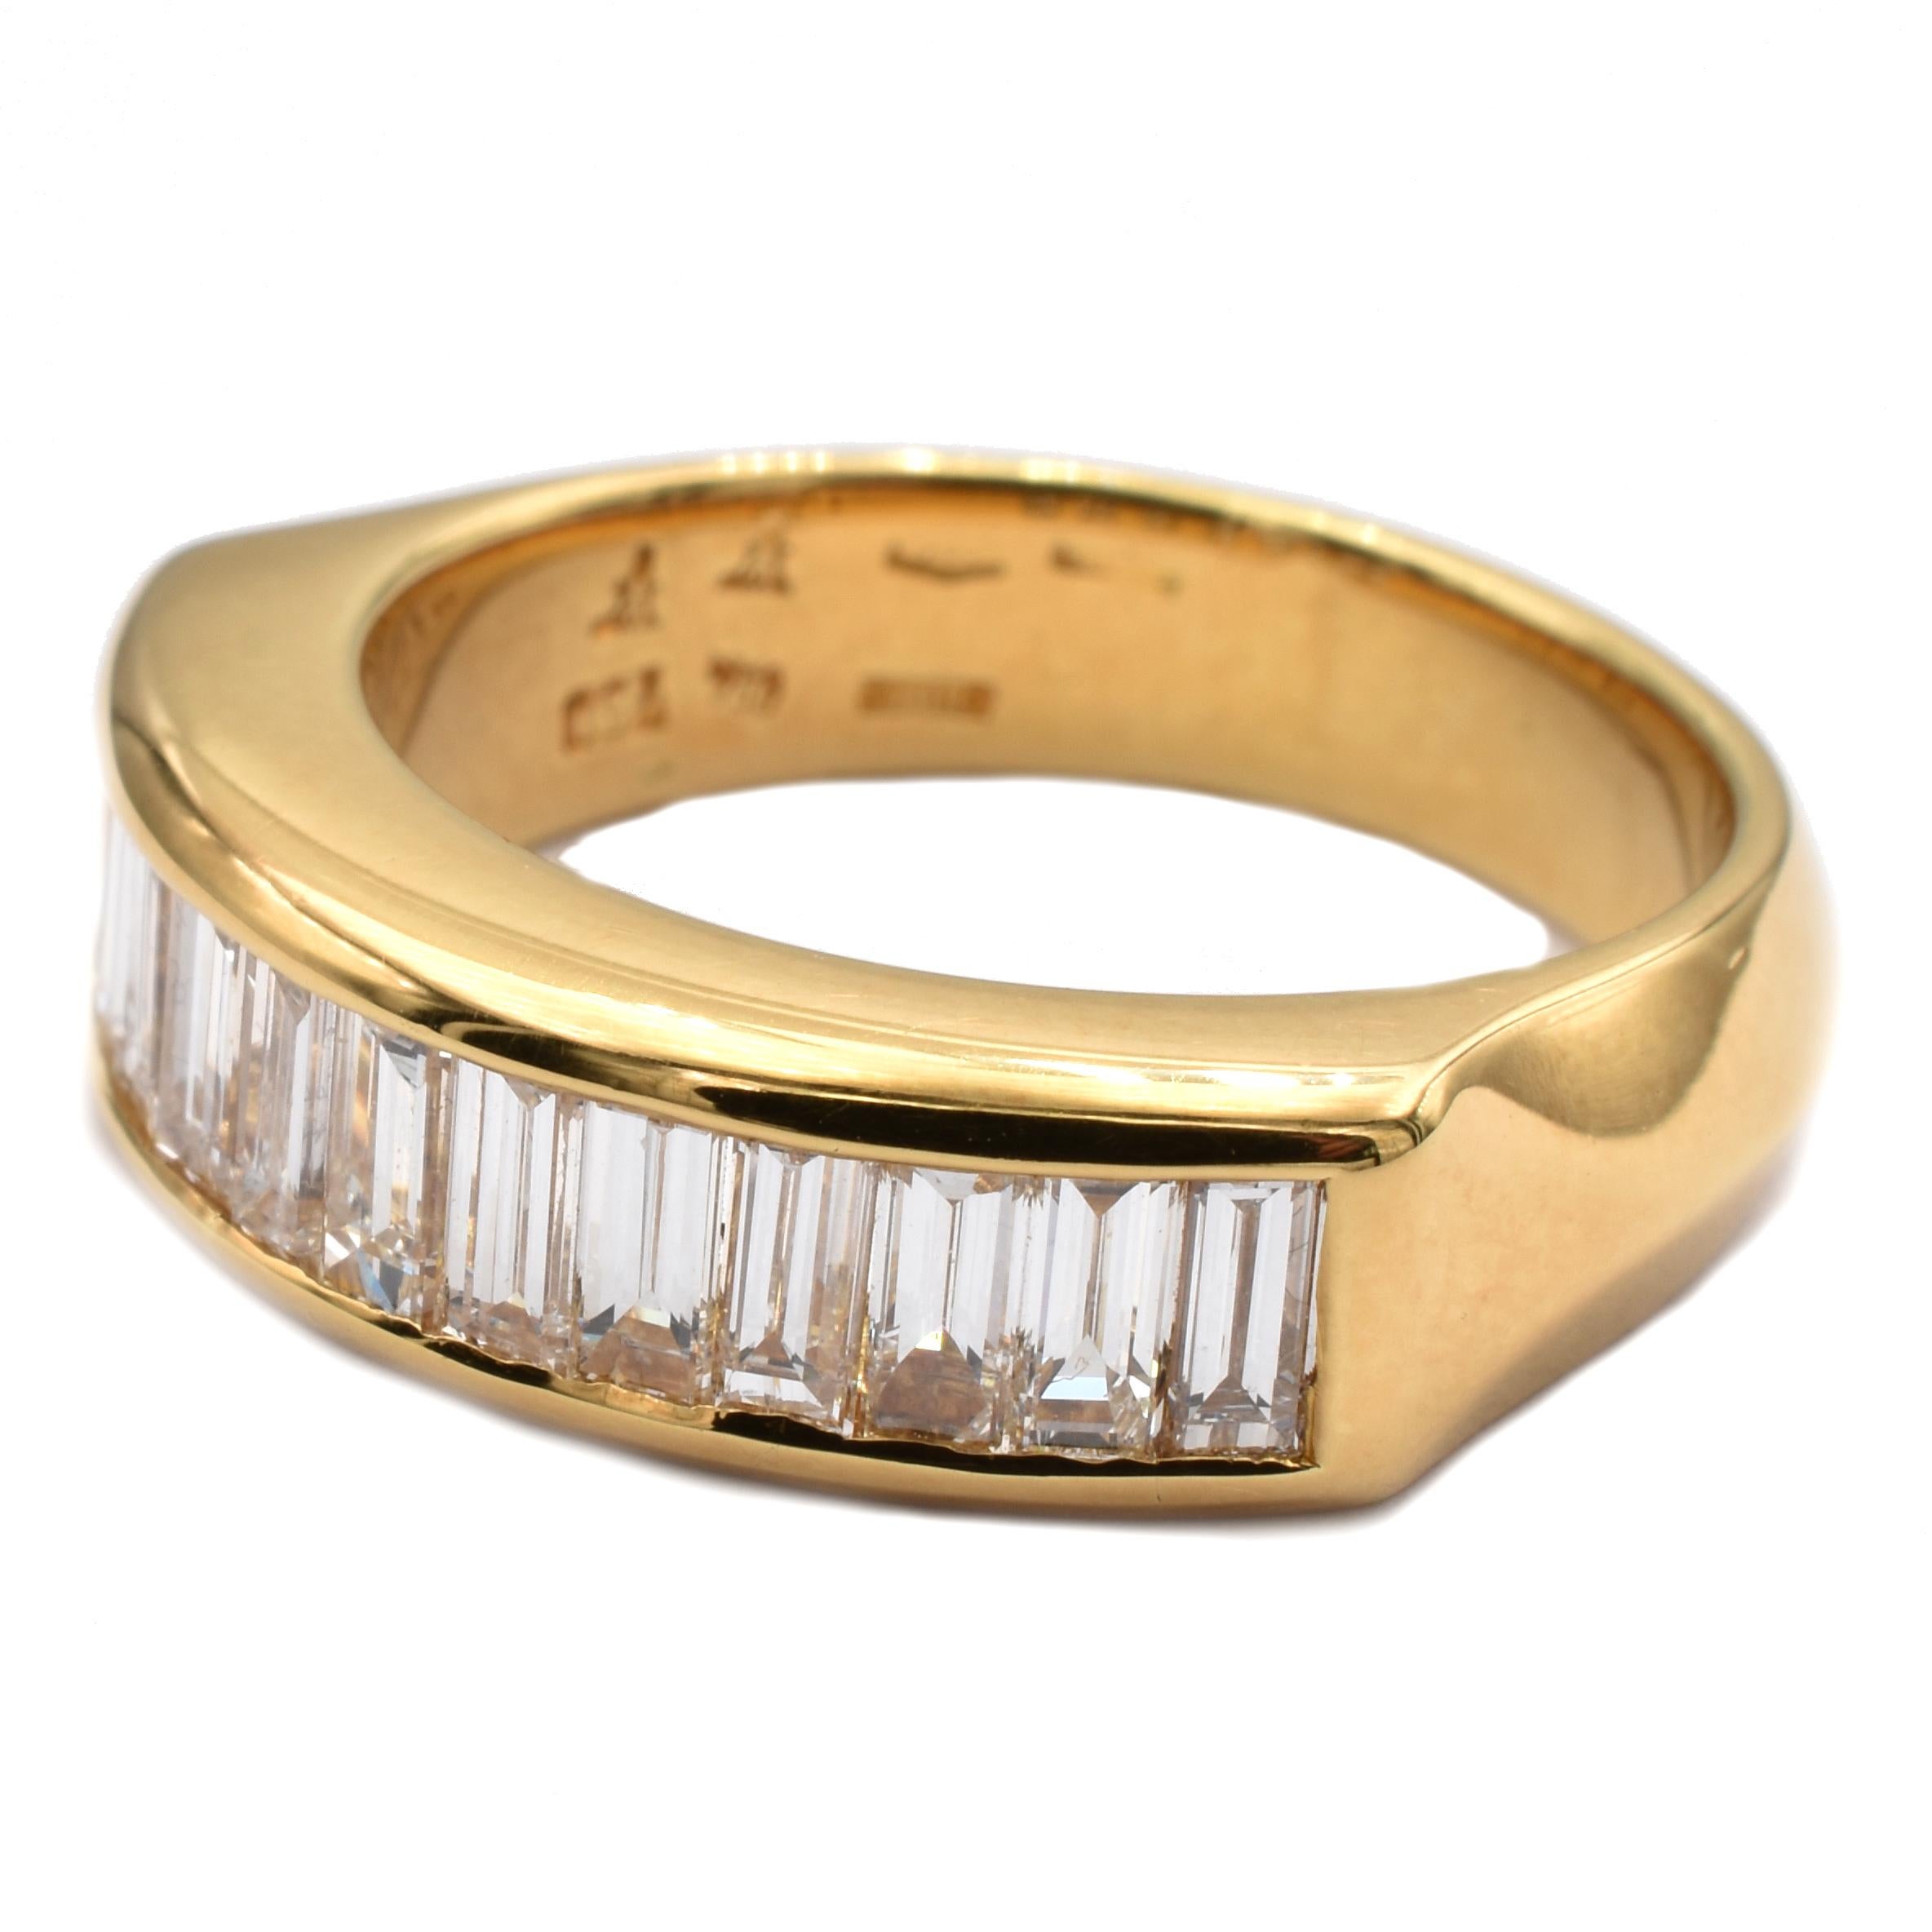 Contemporary Gilberto Cassola Baguette Diamonds Yellow Gold Ring Made in Italy For Sale